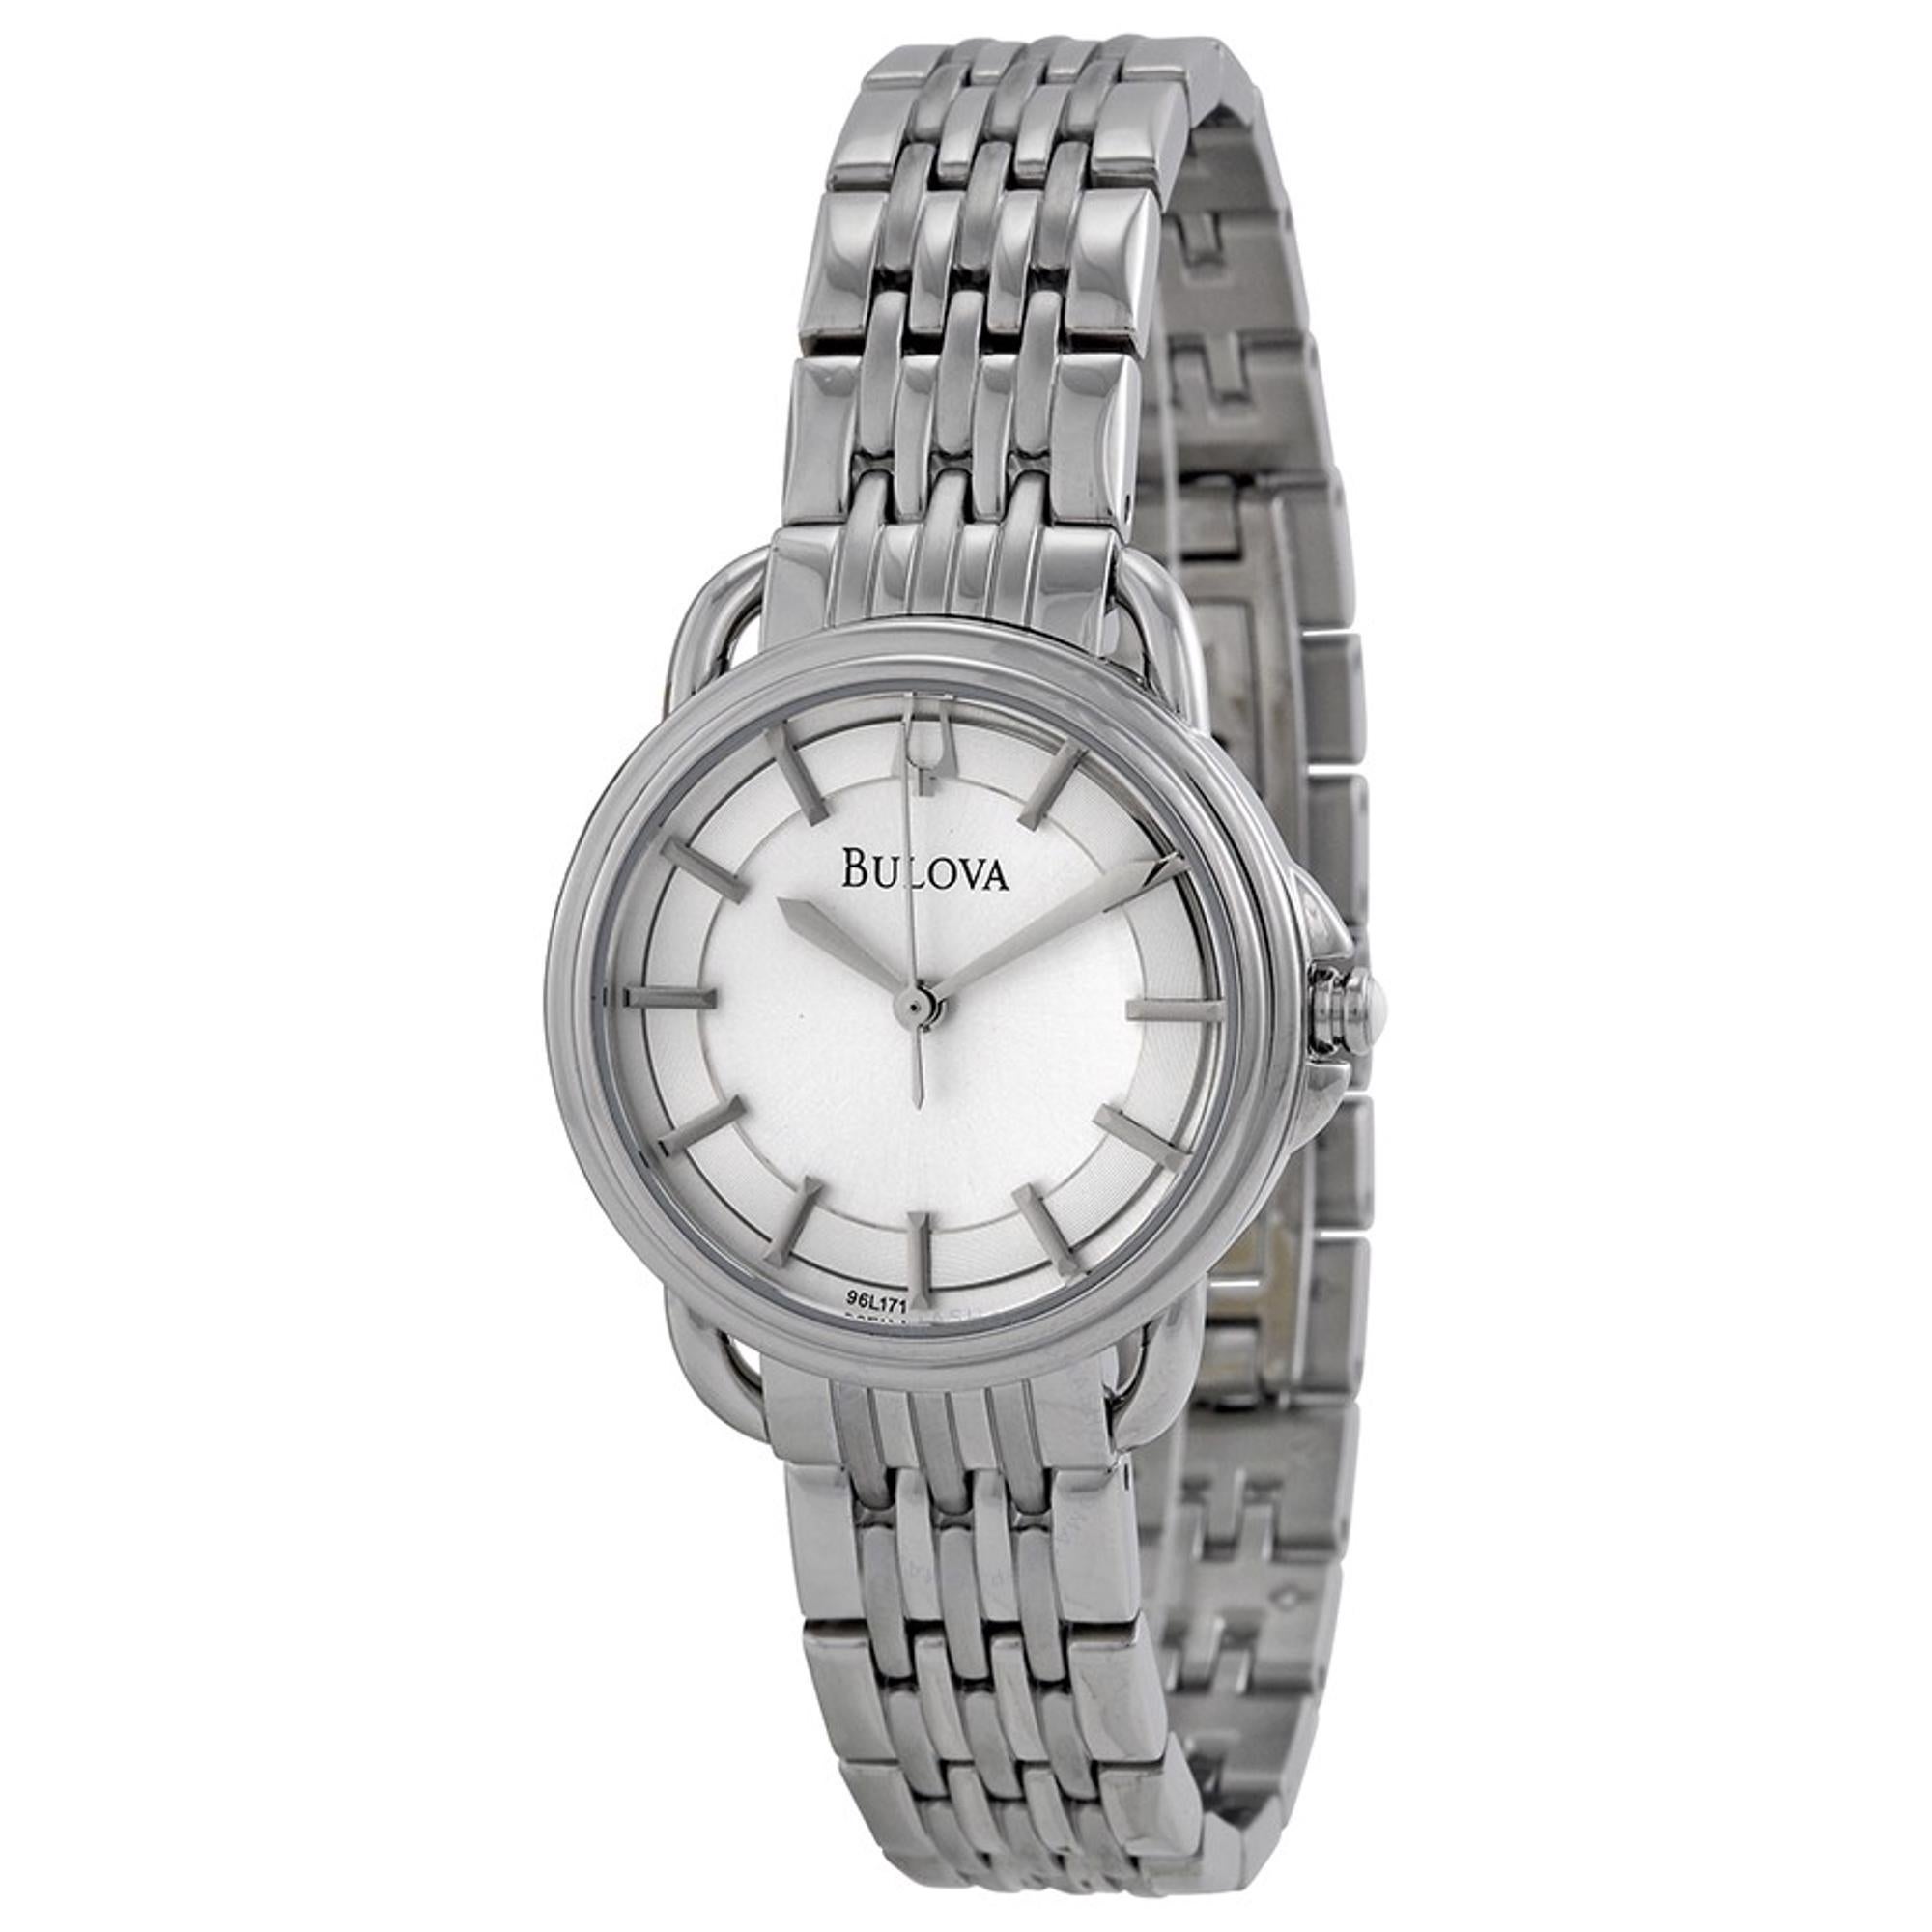 Bulova Dress Silver Sticks Dial Stainless Steel Quartz Ladies Watch 96L171 This Beautiful Timepiece is Powered by a Quartz (Battery) Movement and Features: a Stainless Steel Case and Bracelet, Fixed Stainless Steel Bezel, a Silver Sunburst Dial with